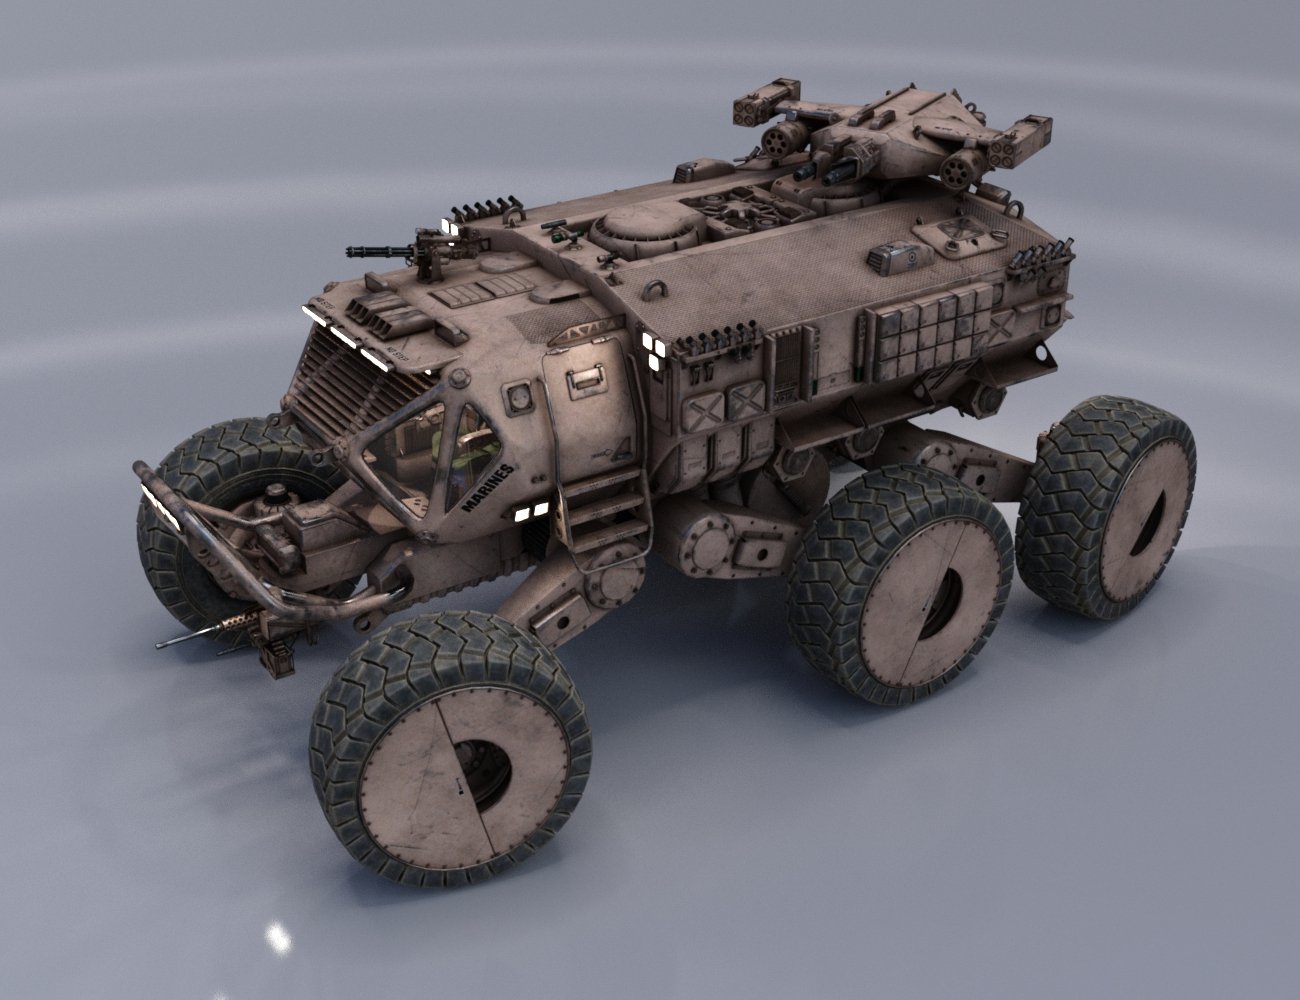 HVPC Combat Manned Rover by: DzFire, 3D Models by Daz 3D